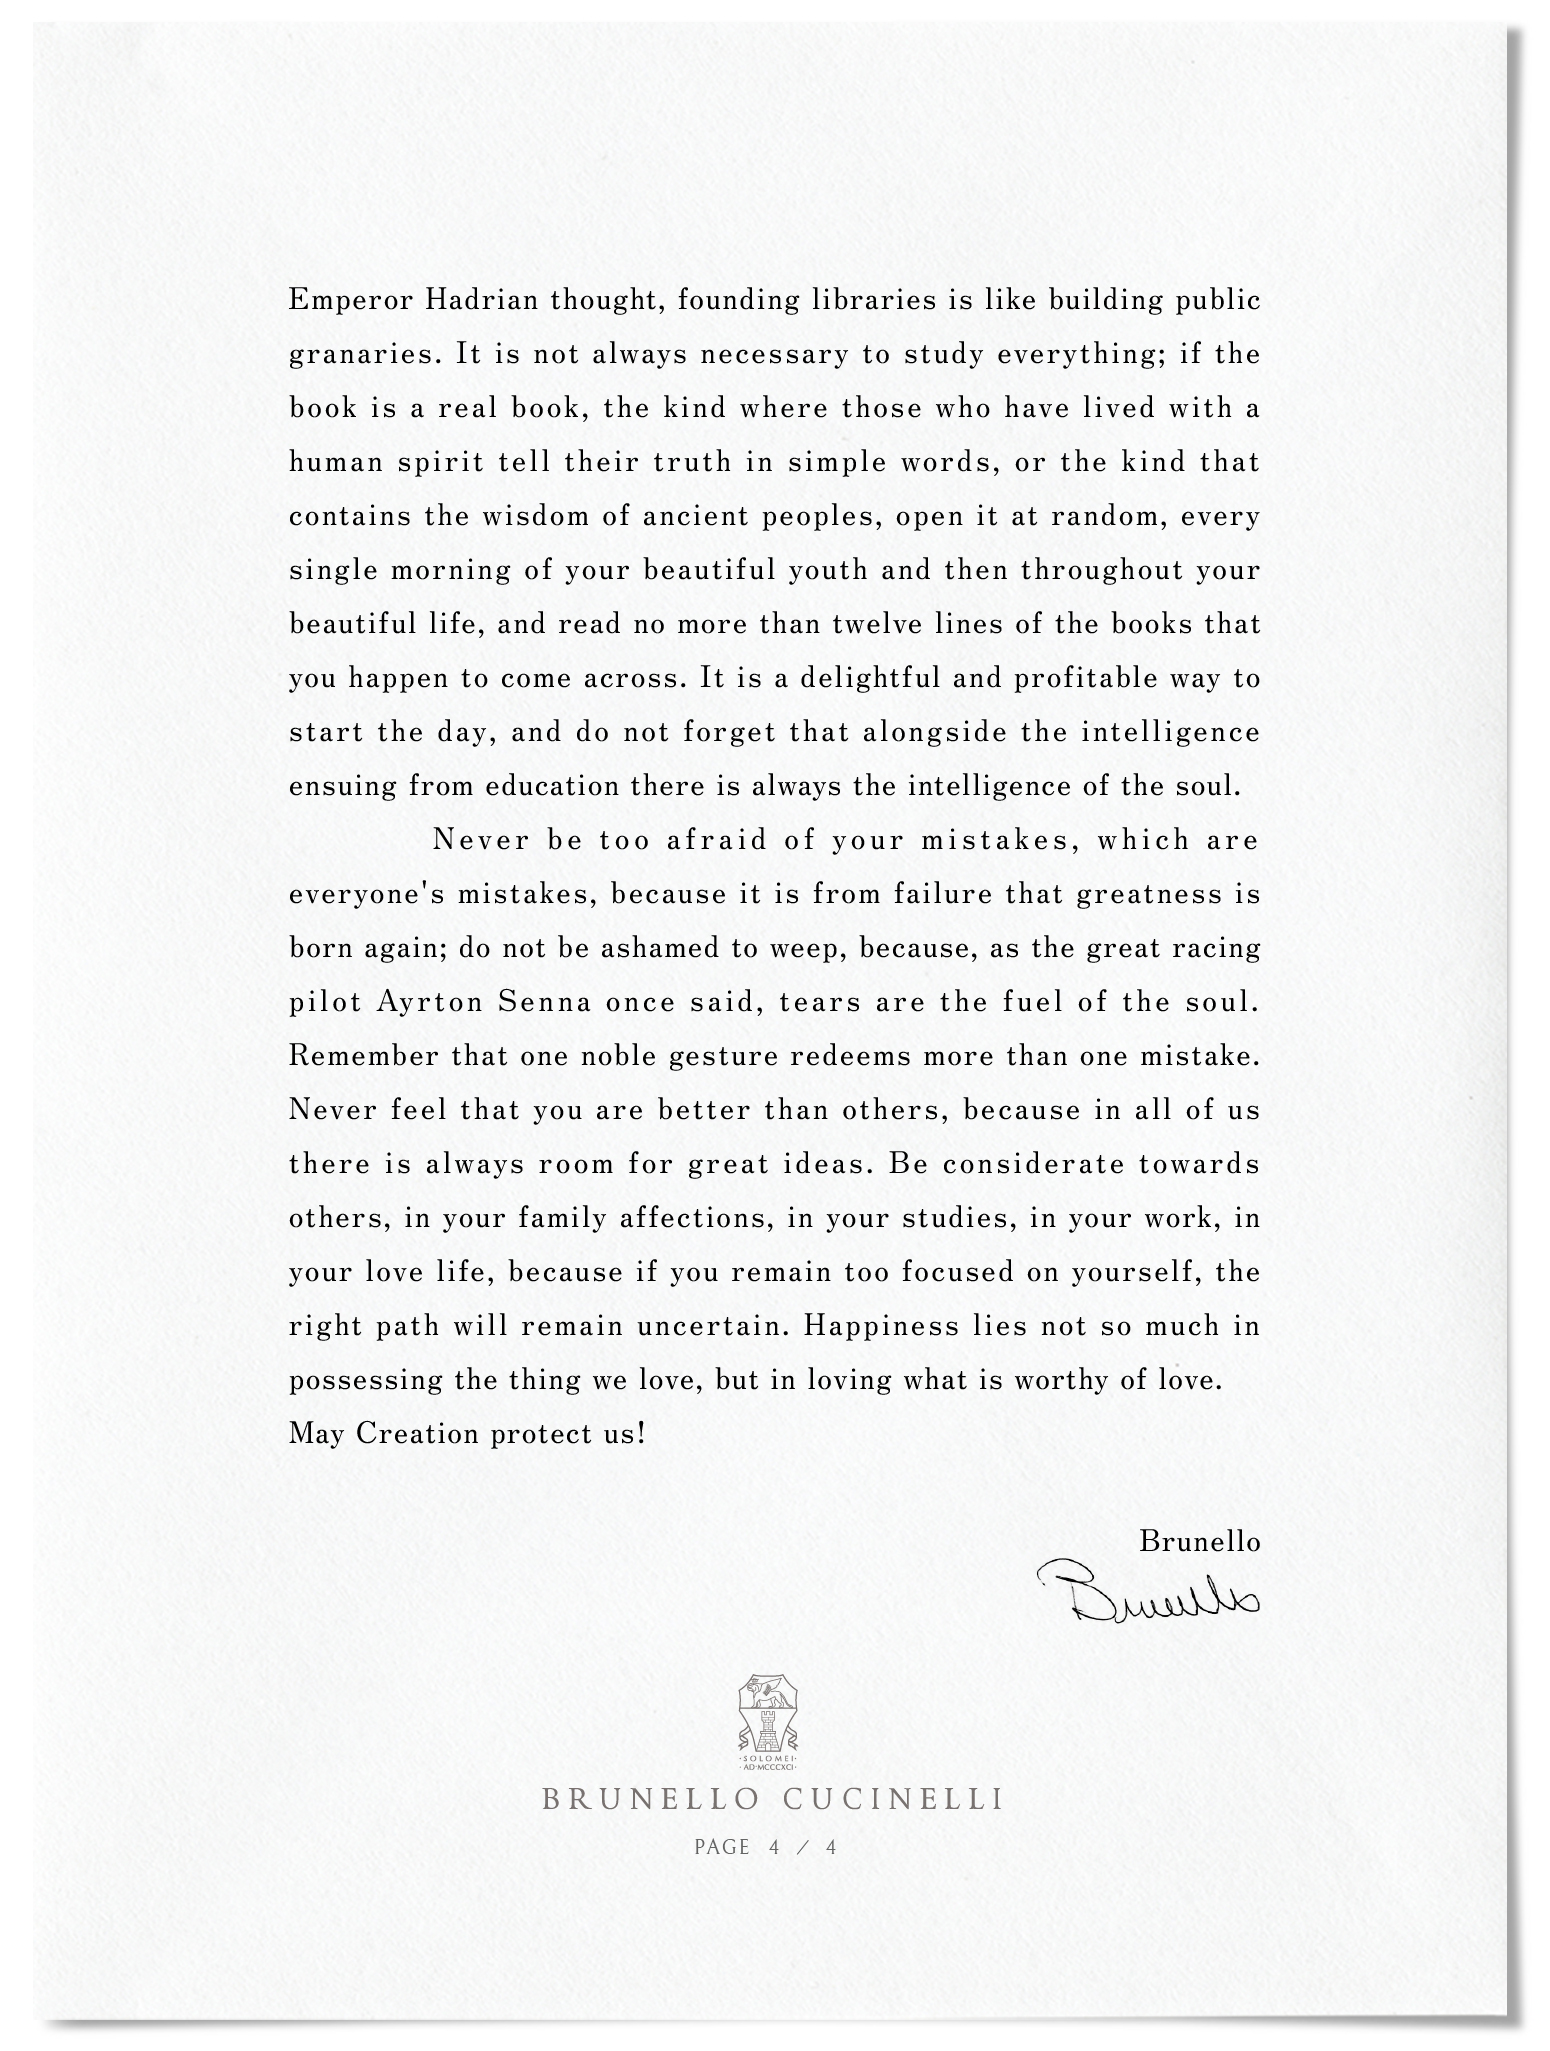 LETTERS from BRUNELLO CUCINELLI